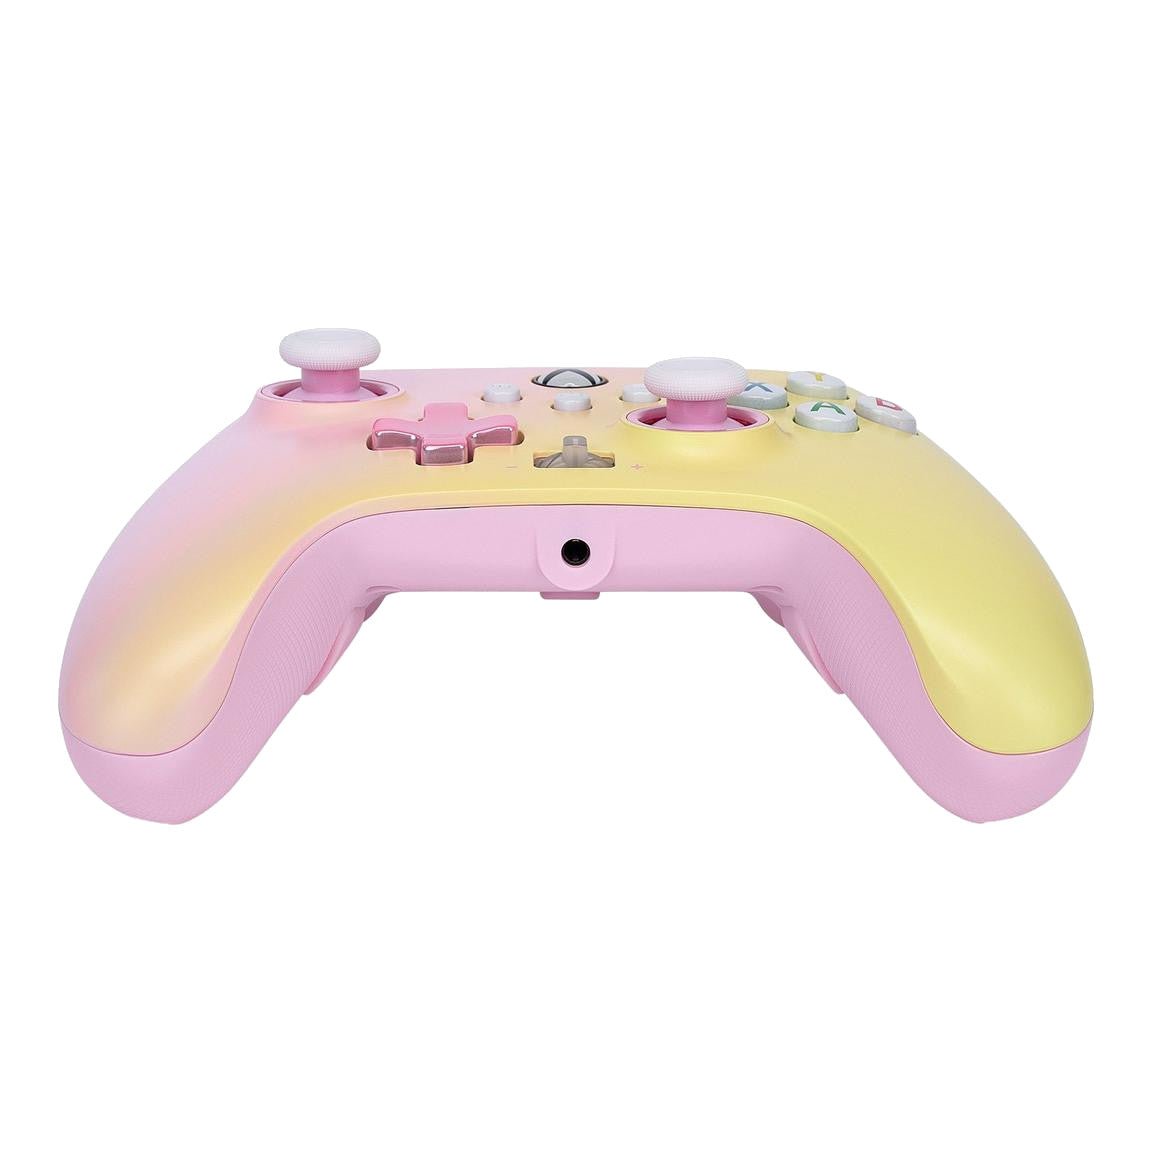 PowerA Enhanced Wired Controller for Xbox Series X|S - Pink Lemonade - Level UpPowerAXbox controller617885045158